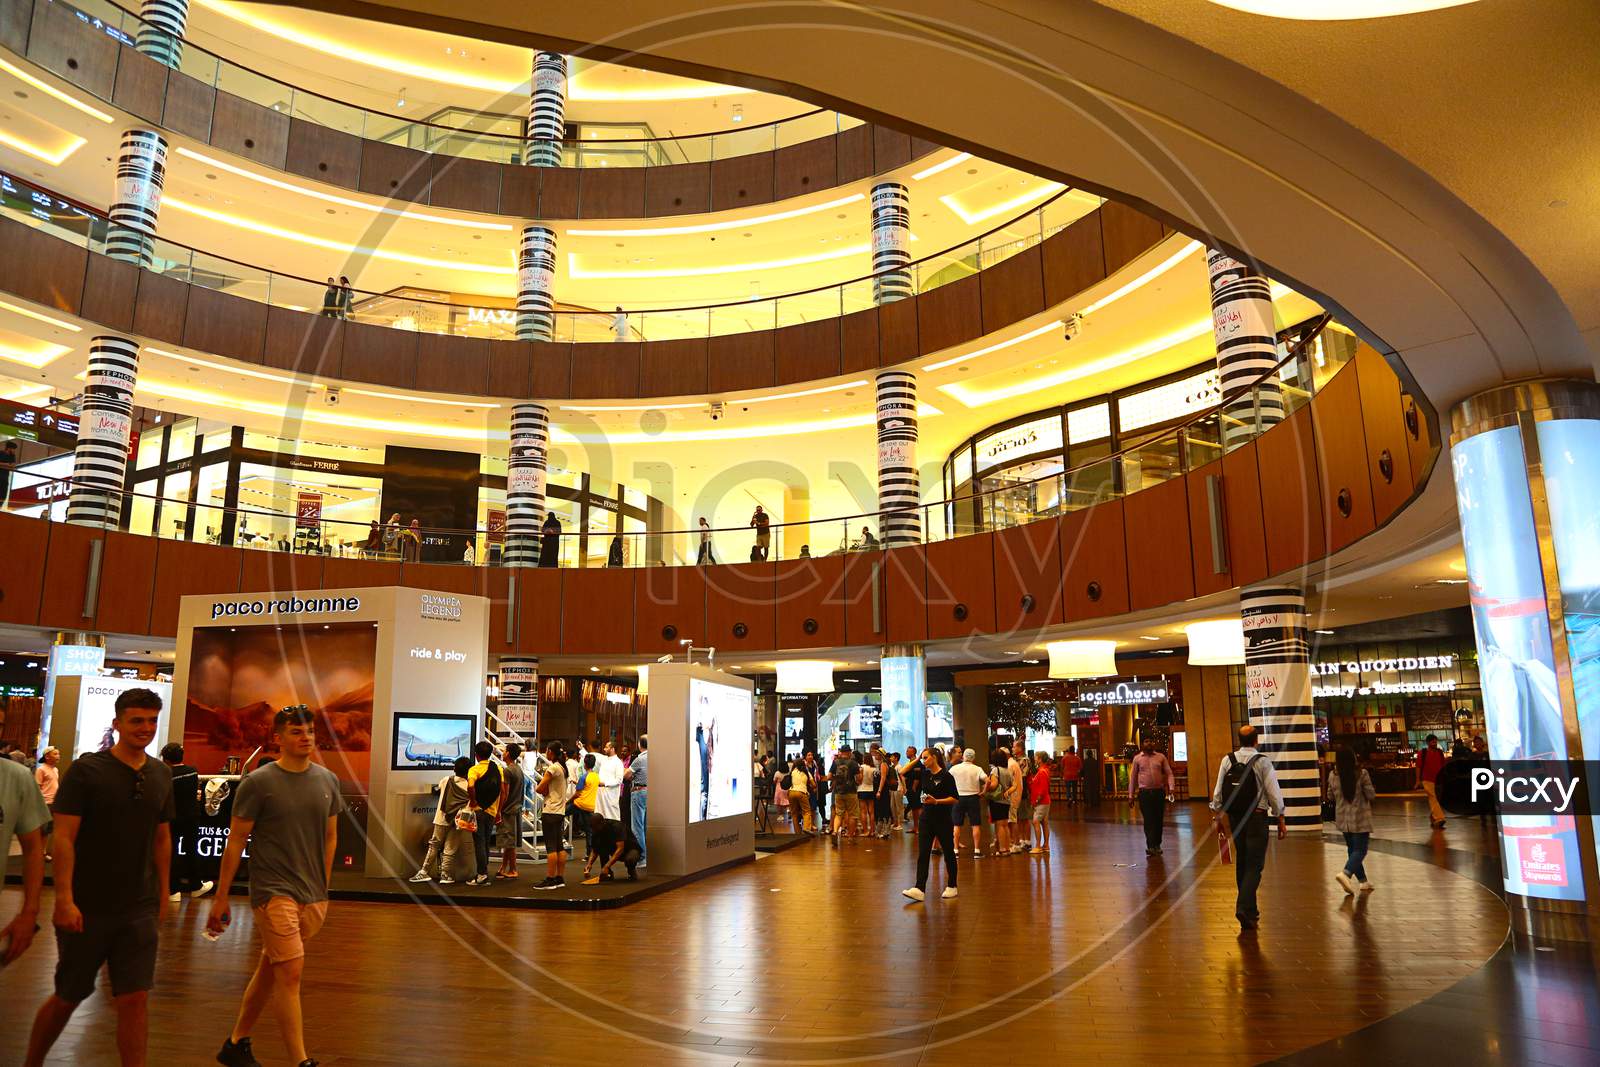 Dubai, United Arab Emirates - June 18Th, 2019: The Dubai Mall Inside View With People All Around Walking And Shopping - Image